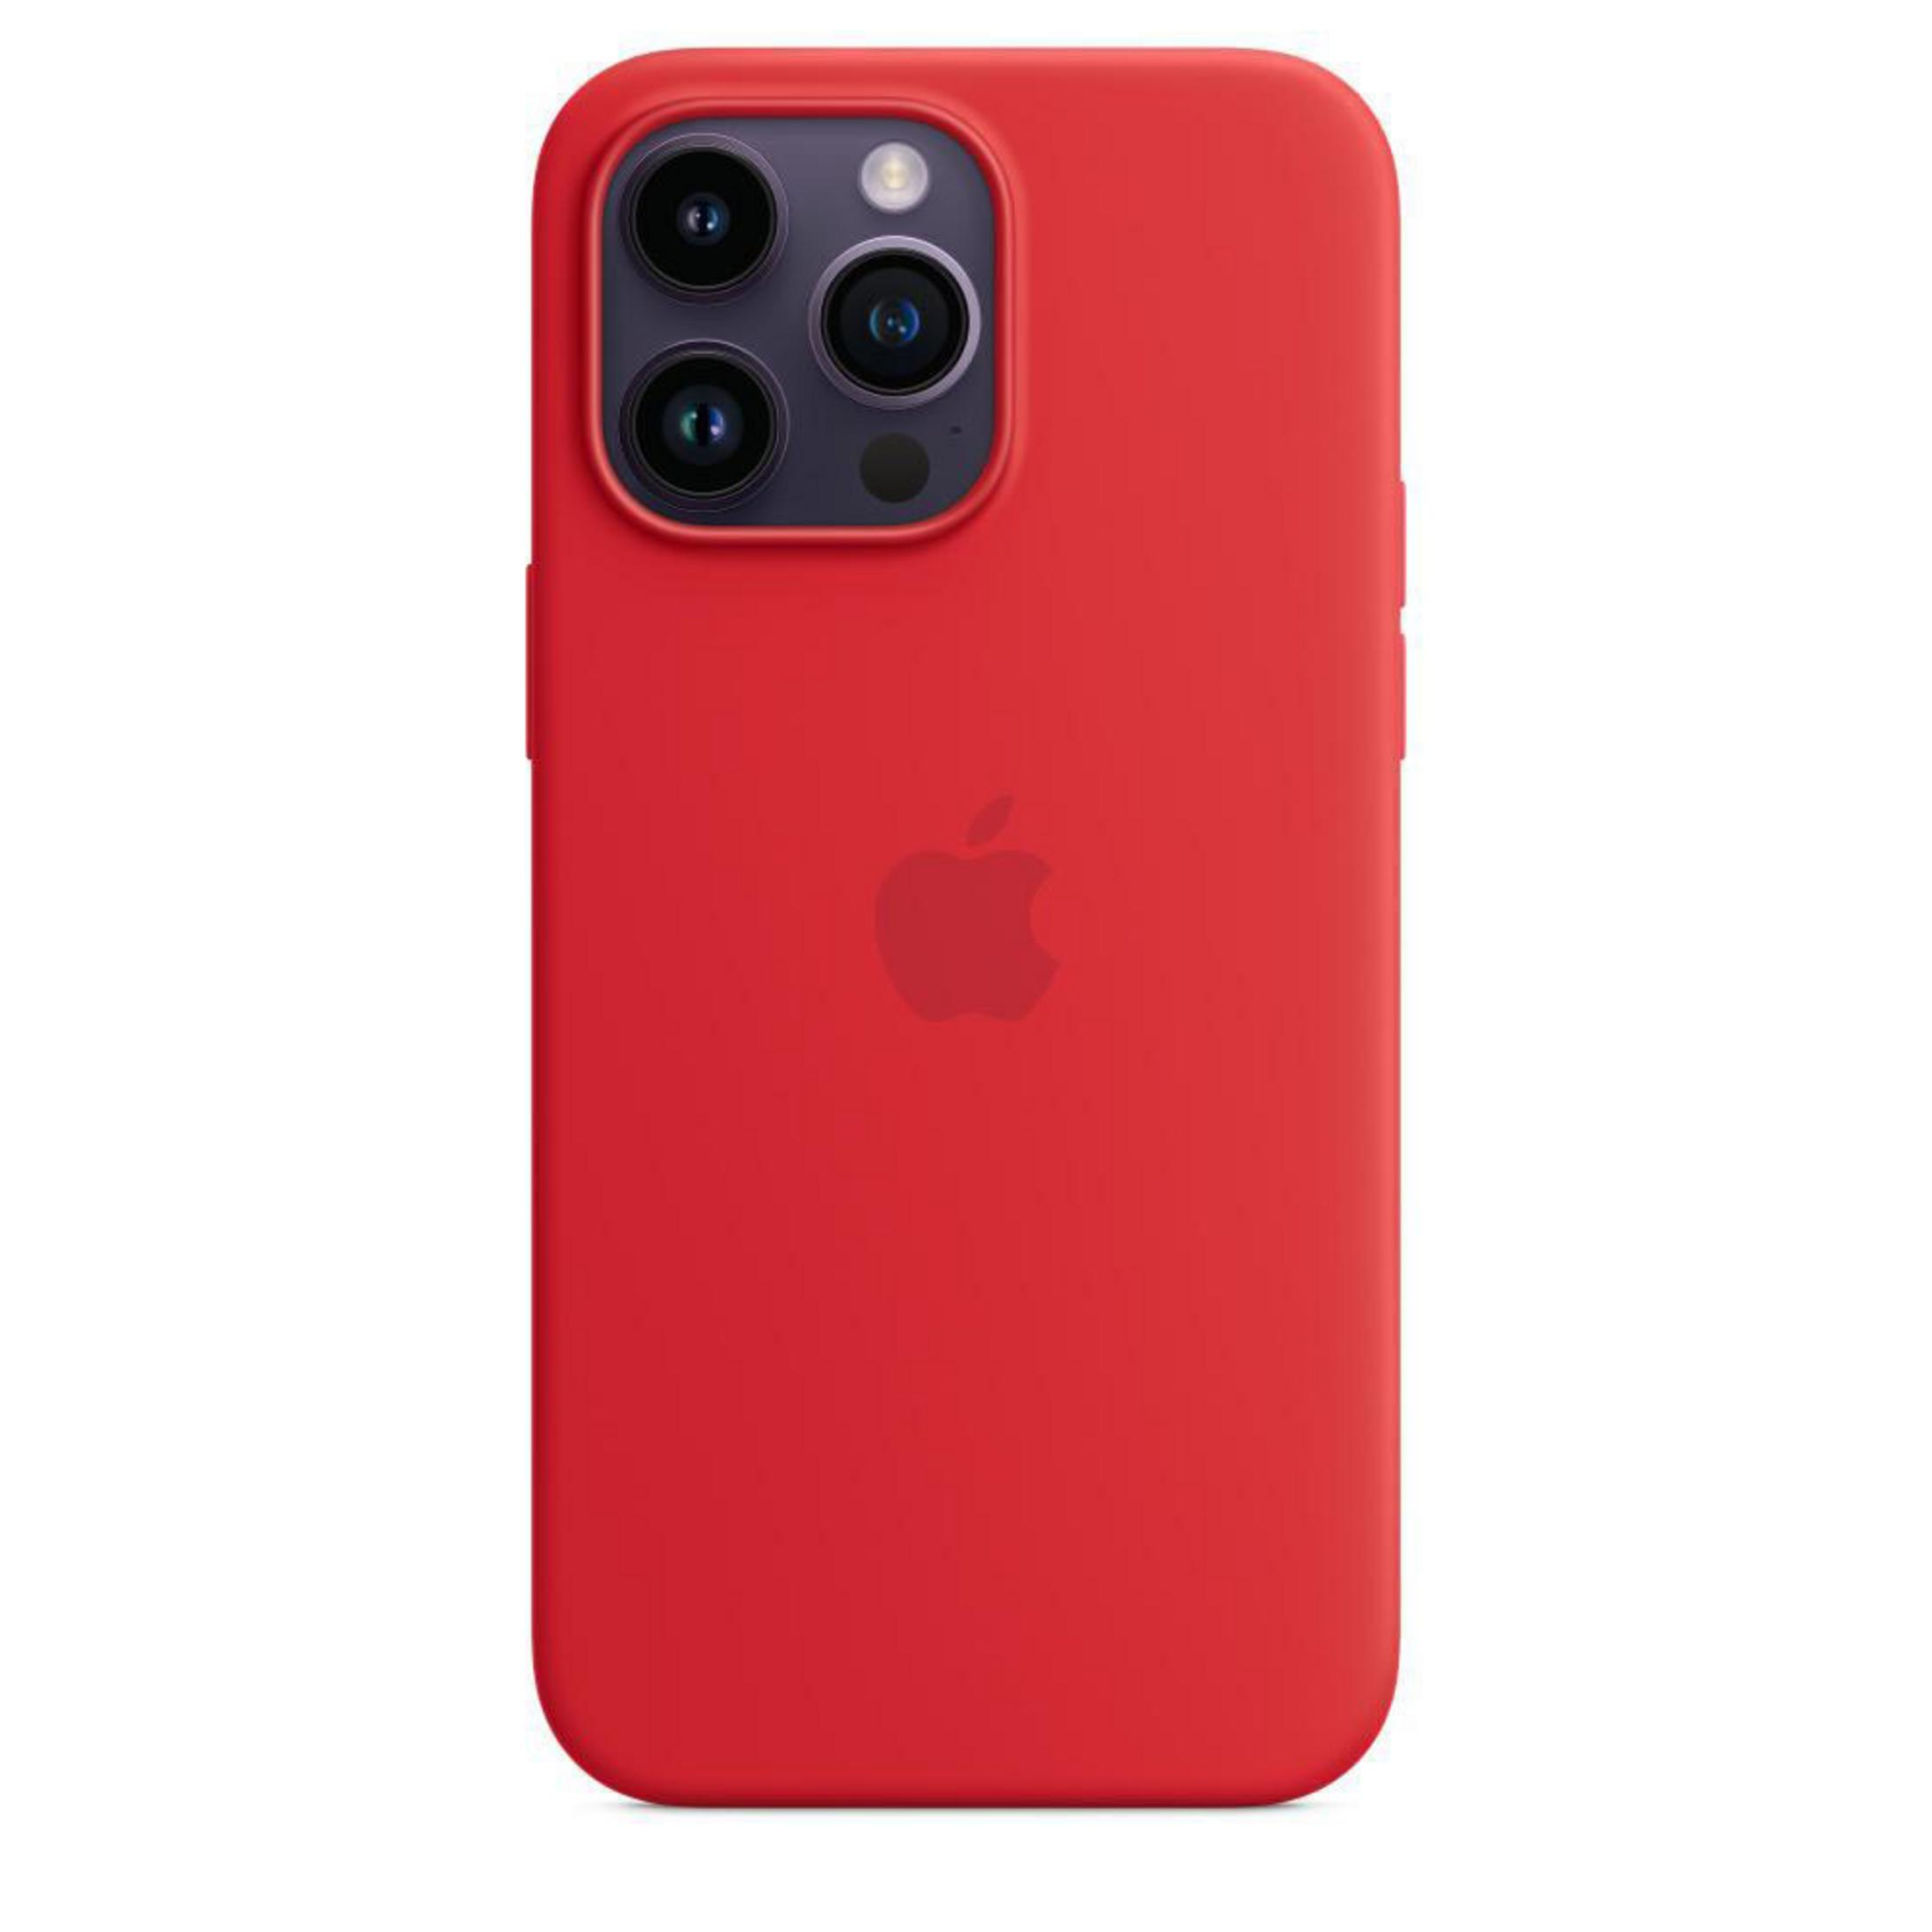 APPLE MPTR3ZM/A IP14PROMAX SIL iPhone Backcover, MS RED, Max, Pro (PRODUCT)RED CASE 14 Apple